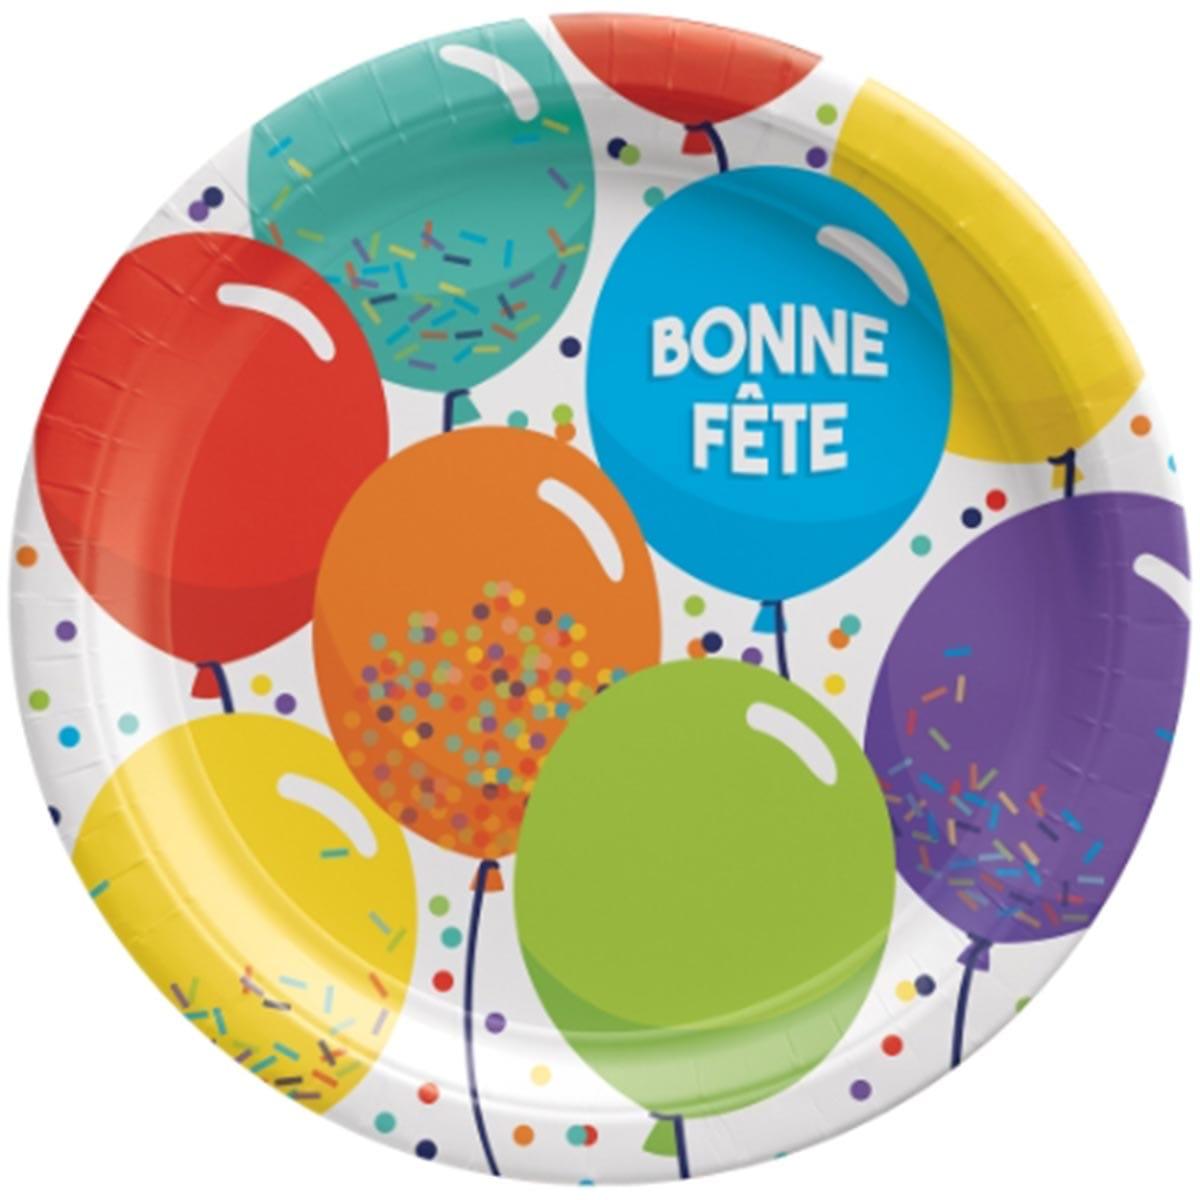 Buy General Birthday Bonne Fête Balloons - Plates 9 inches, 8 Count sold at Party Expert